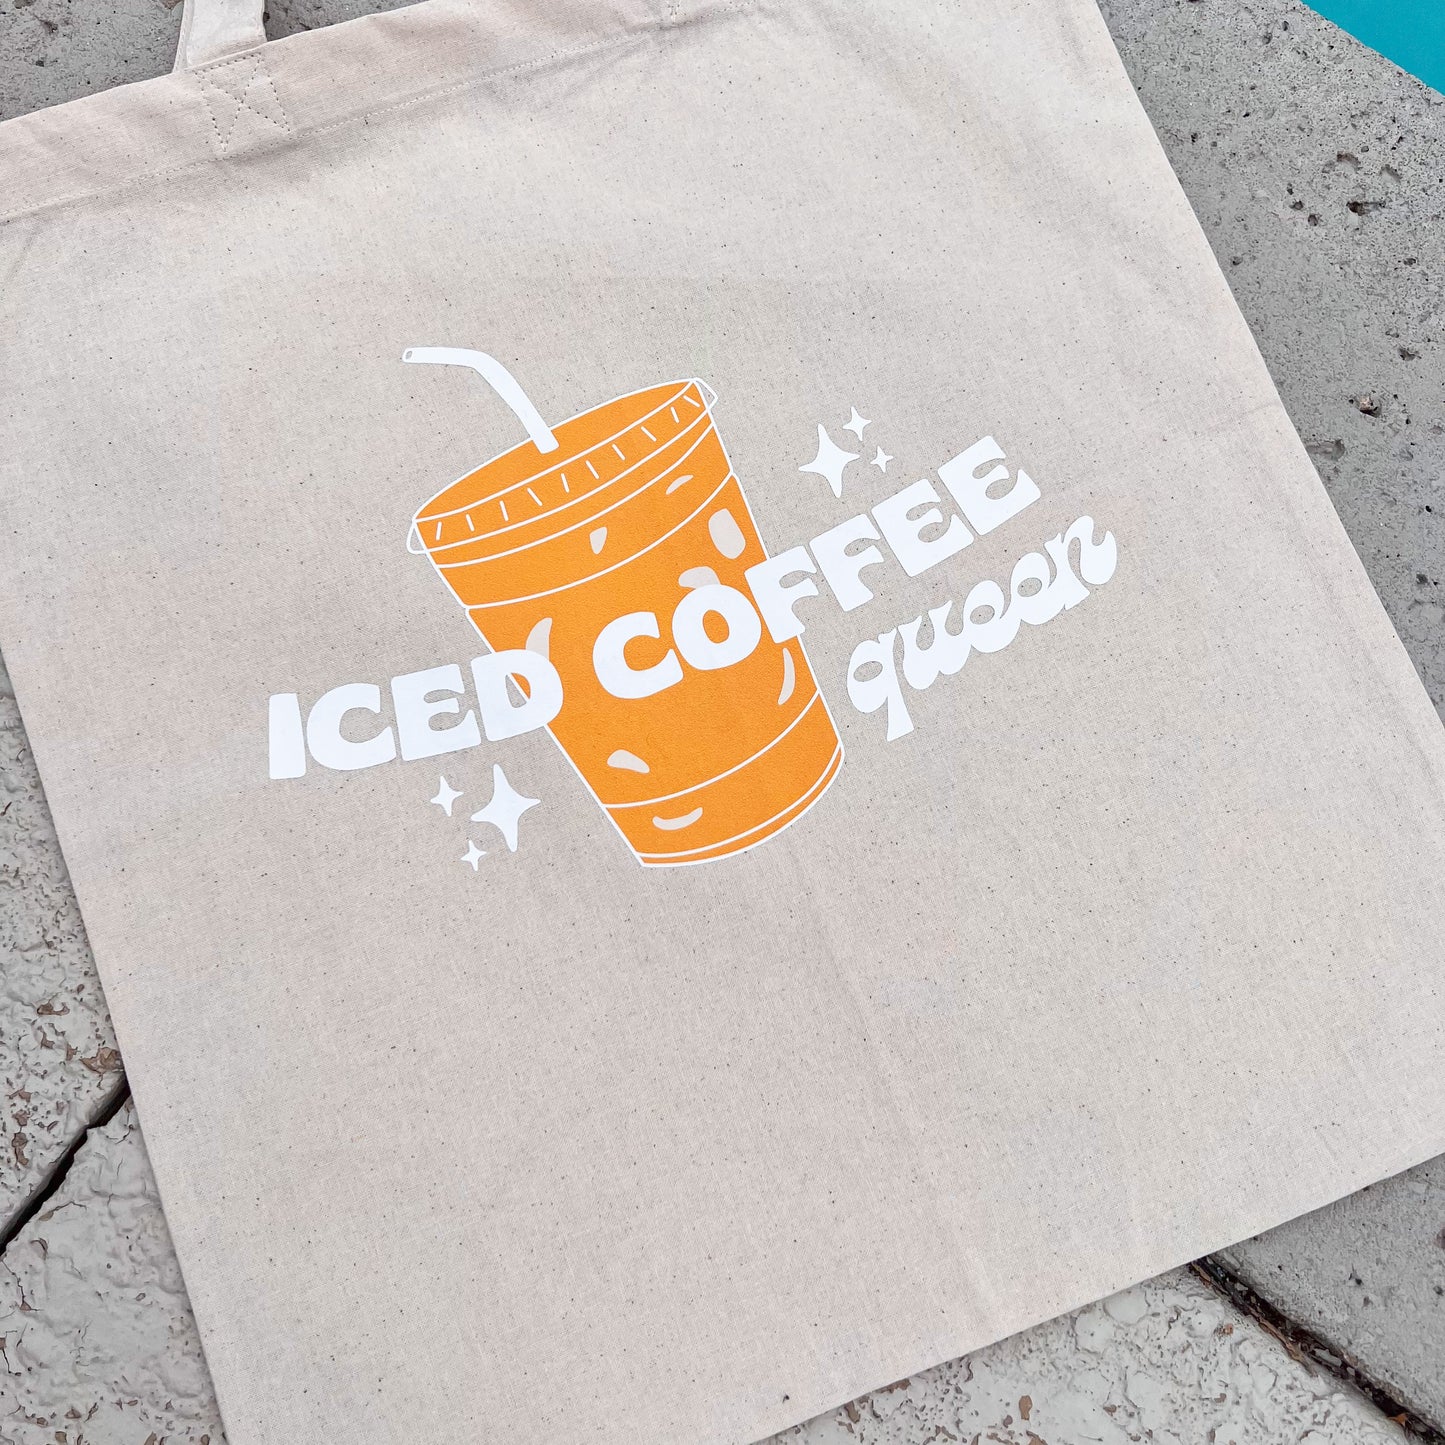 Iced Coffee Queen Tote Bag